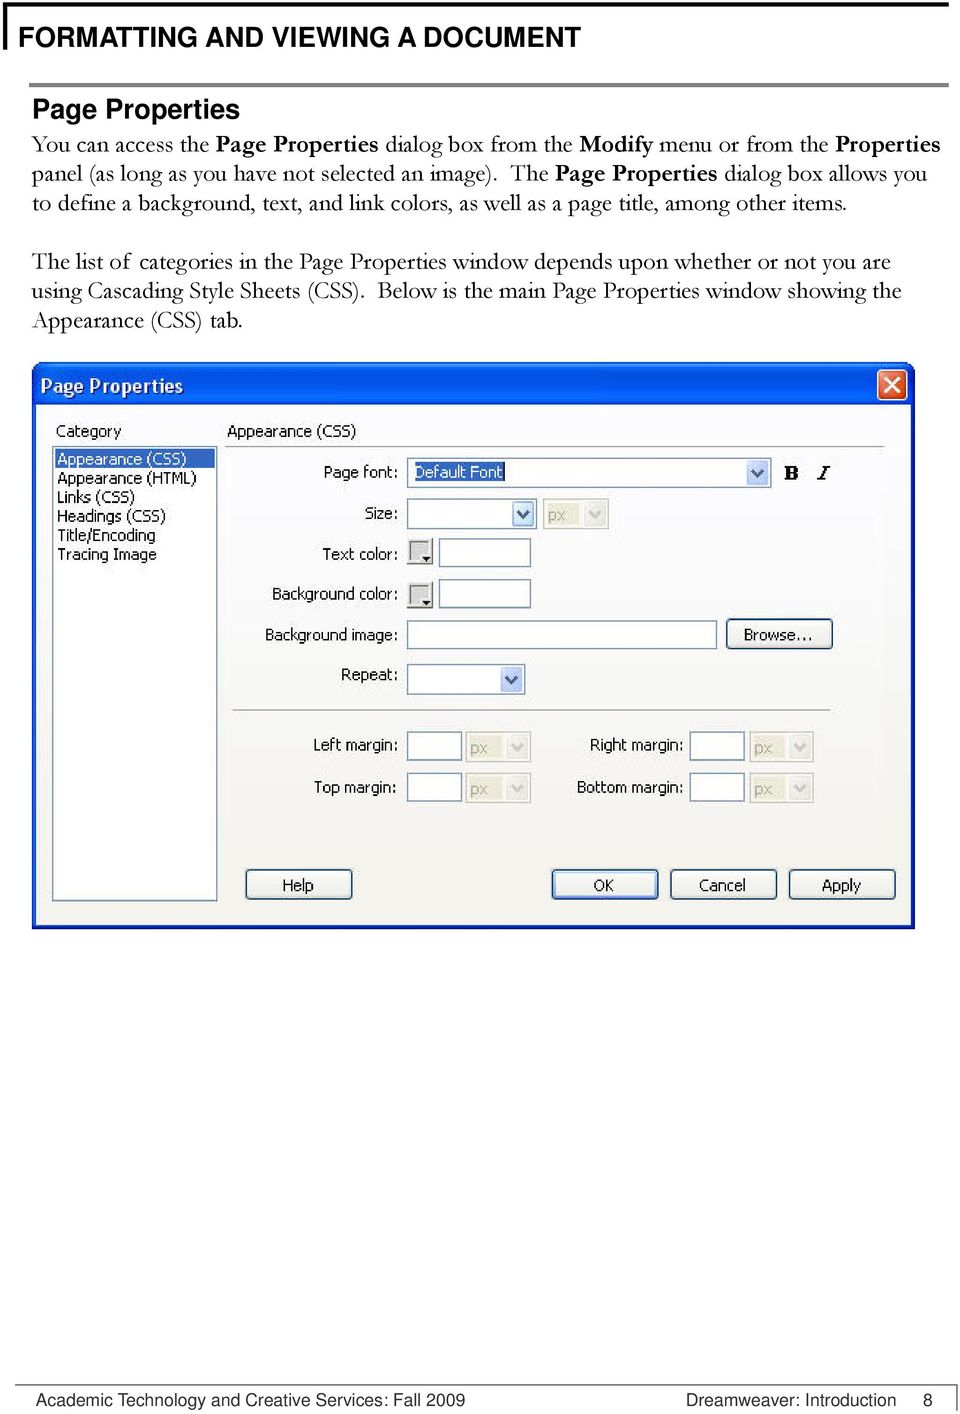 The Page Properties dialog box allows you to define a background, text, and link colors, as well as a page title, among other items.